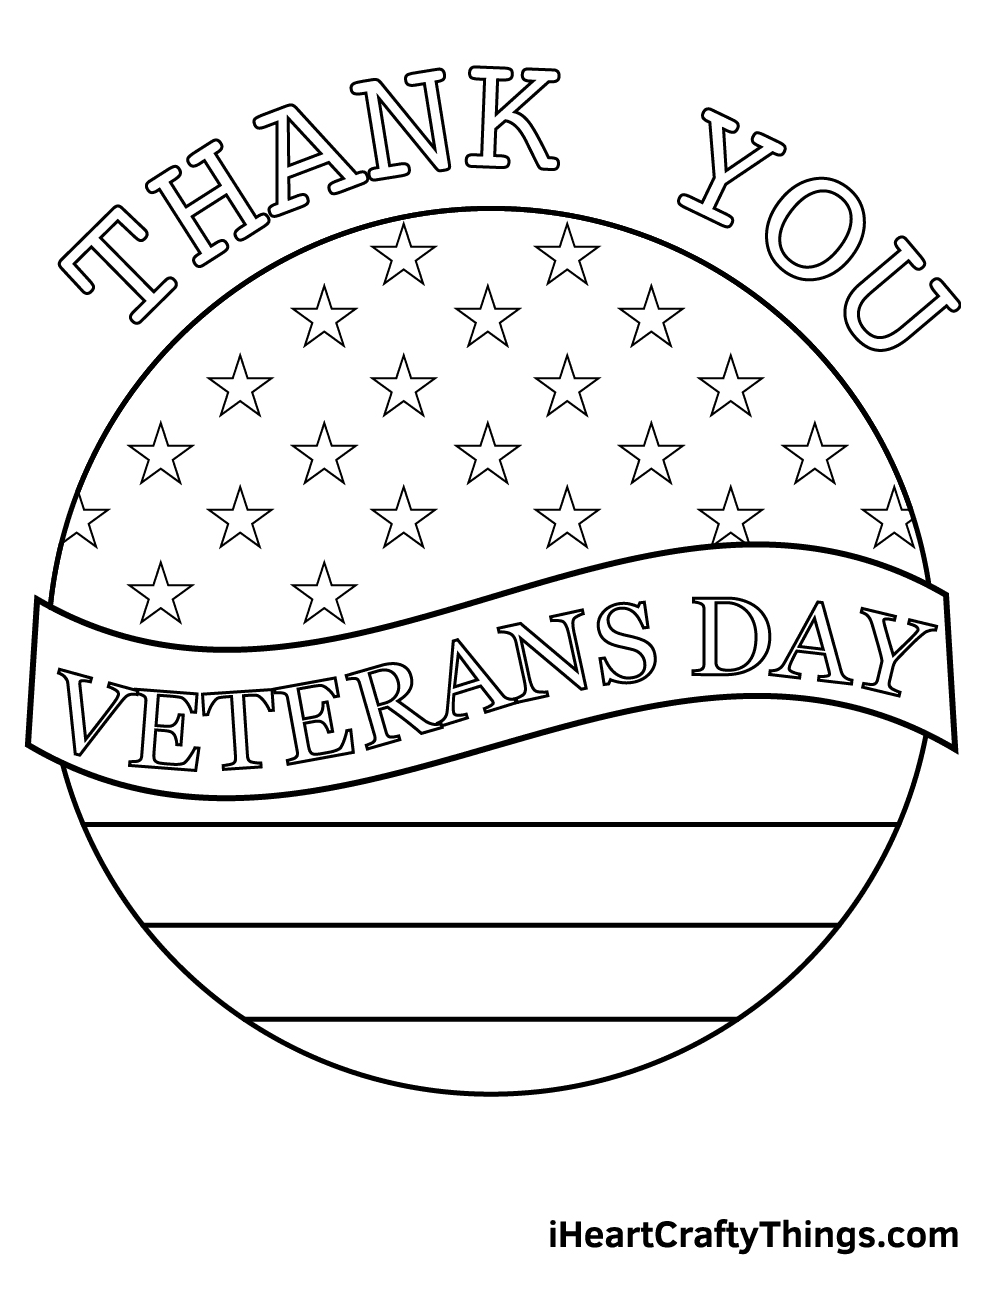 We Love Our Veterans Coloring Pages   Veterans Day Coloring Pages ...